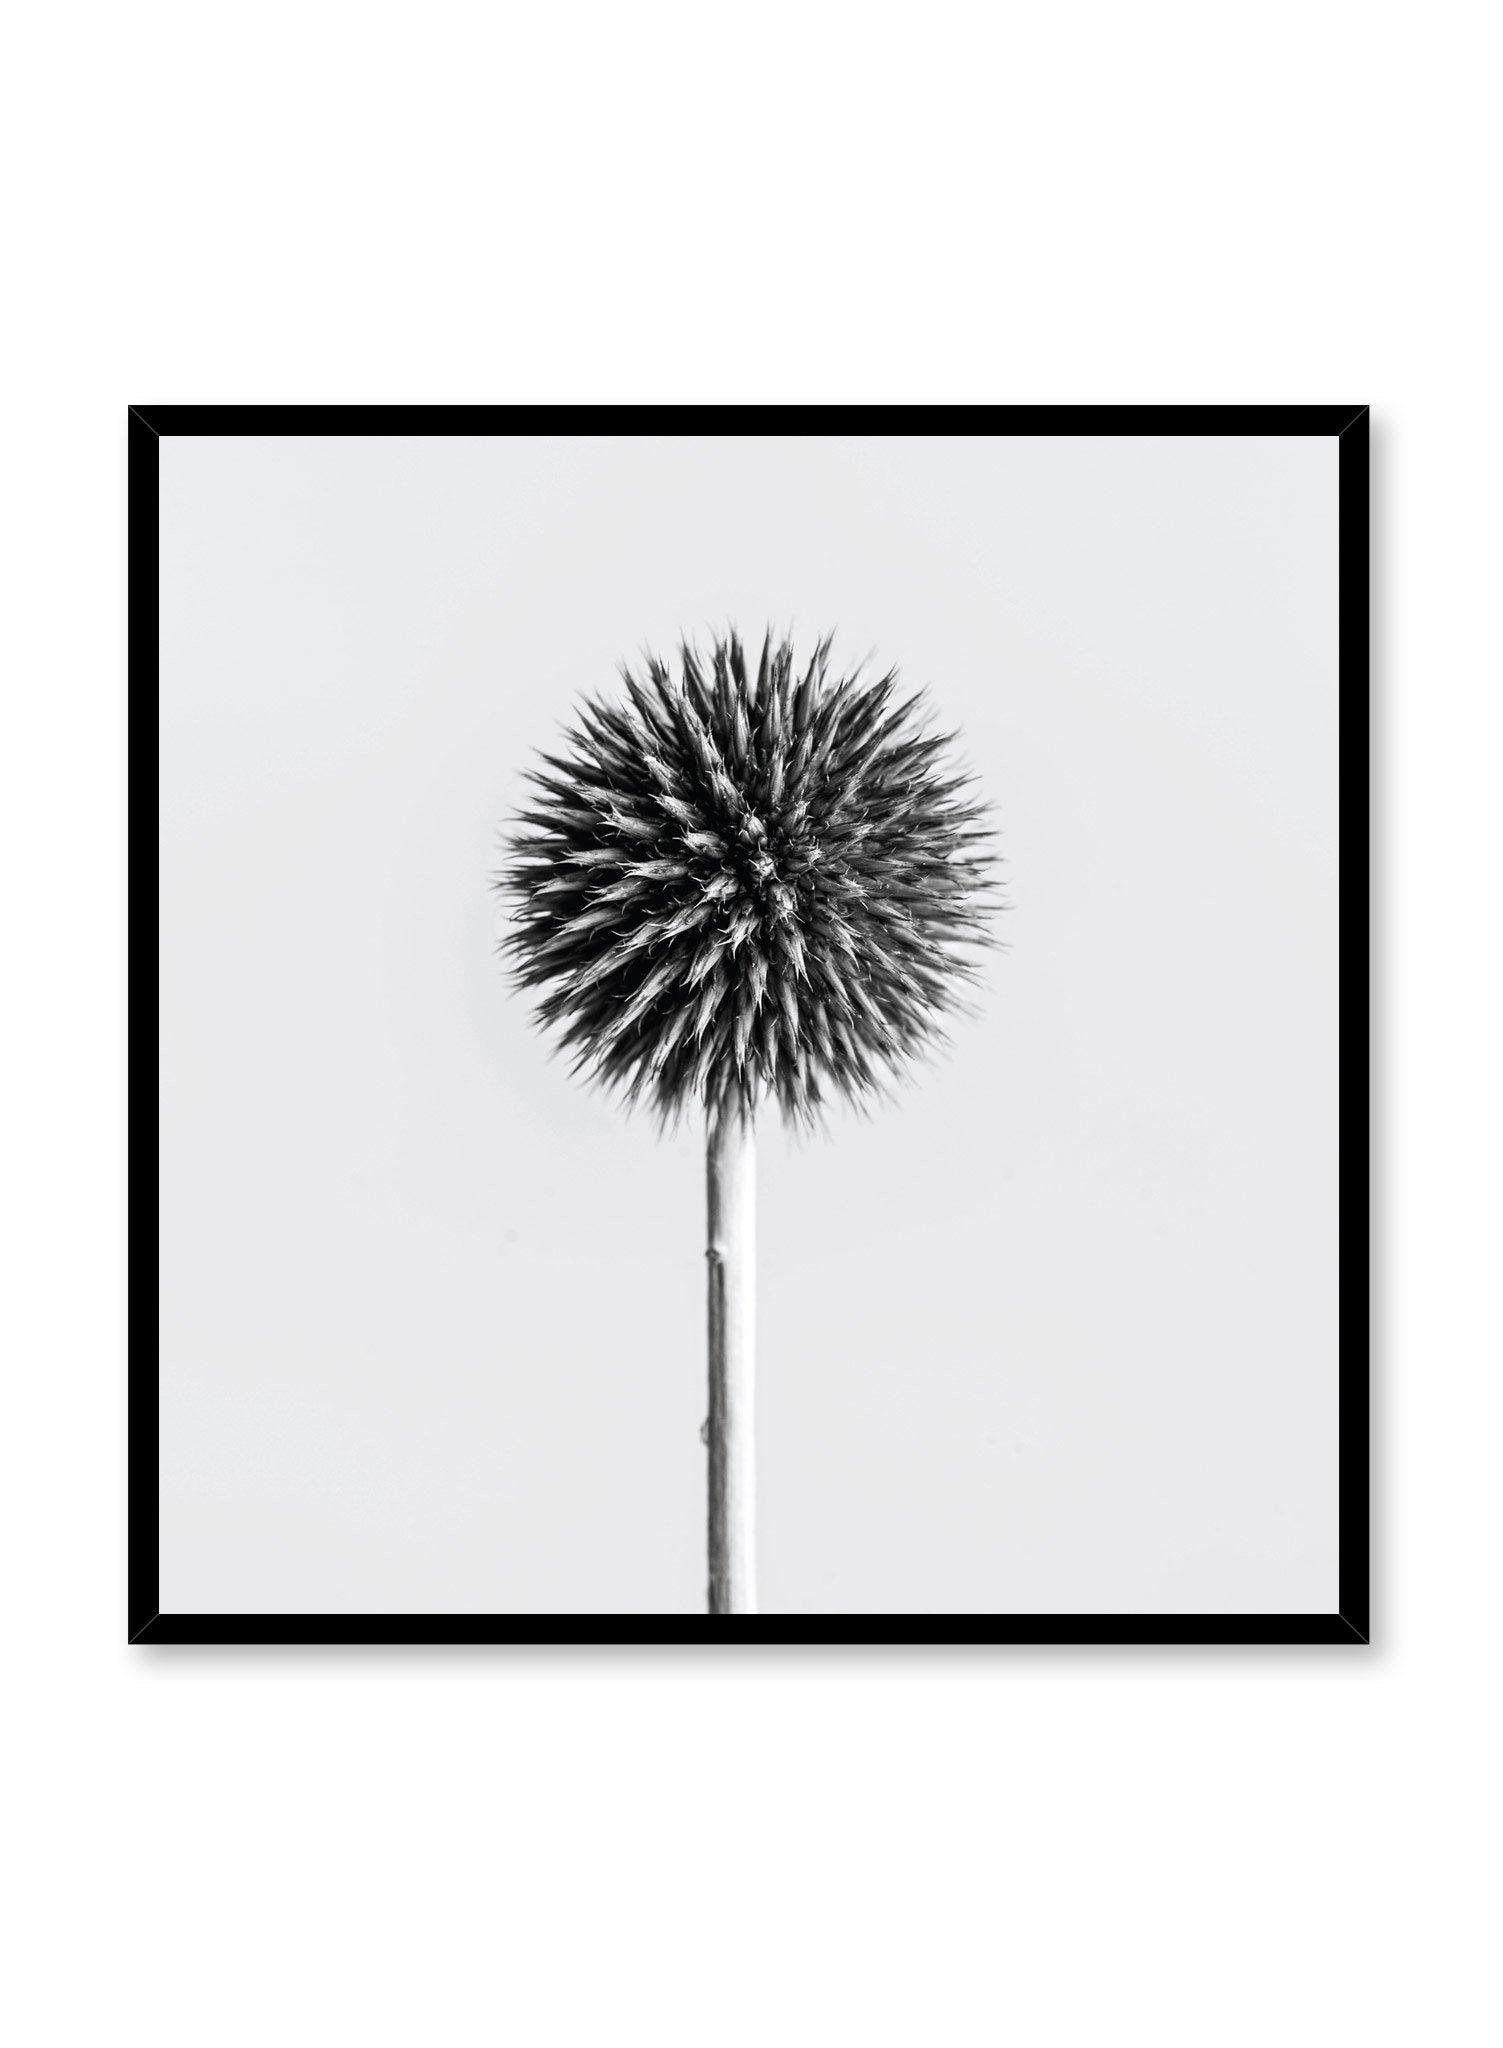 Scandinavian poster by Opposite Wall with Silver Thistle black and white art photo in square format